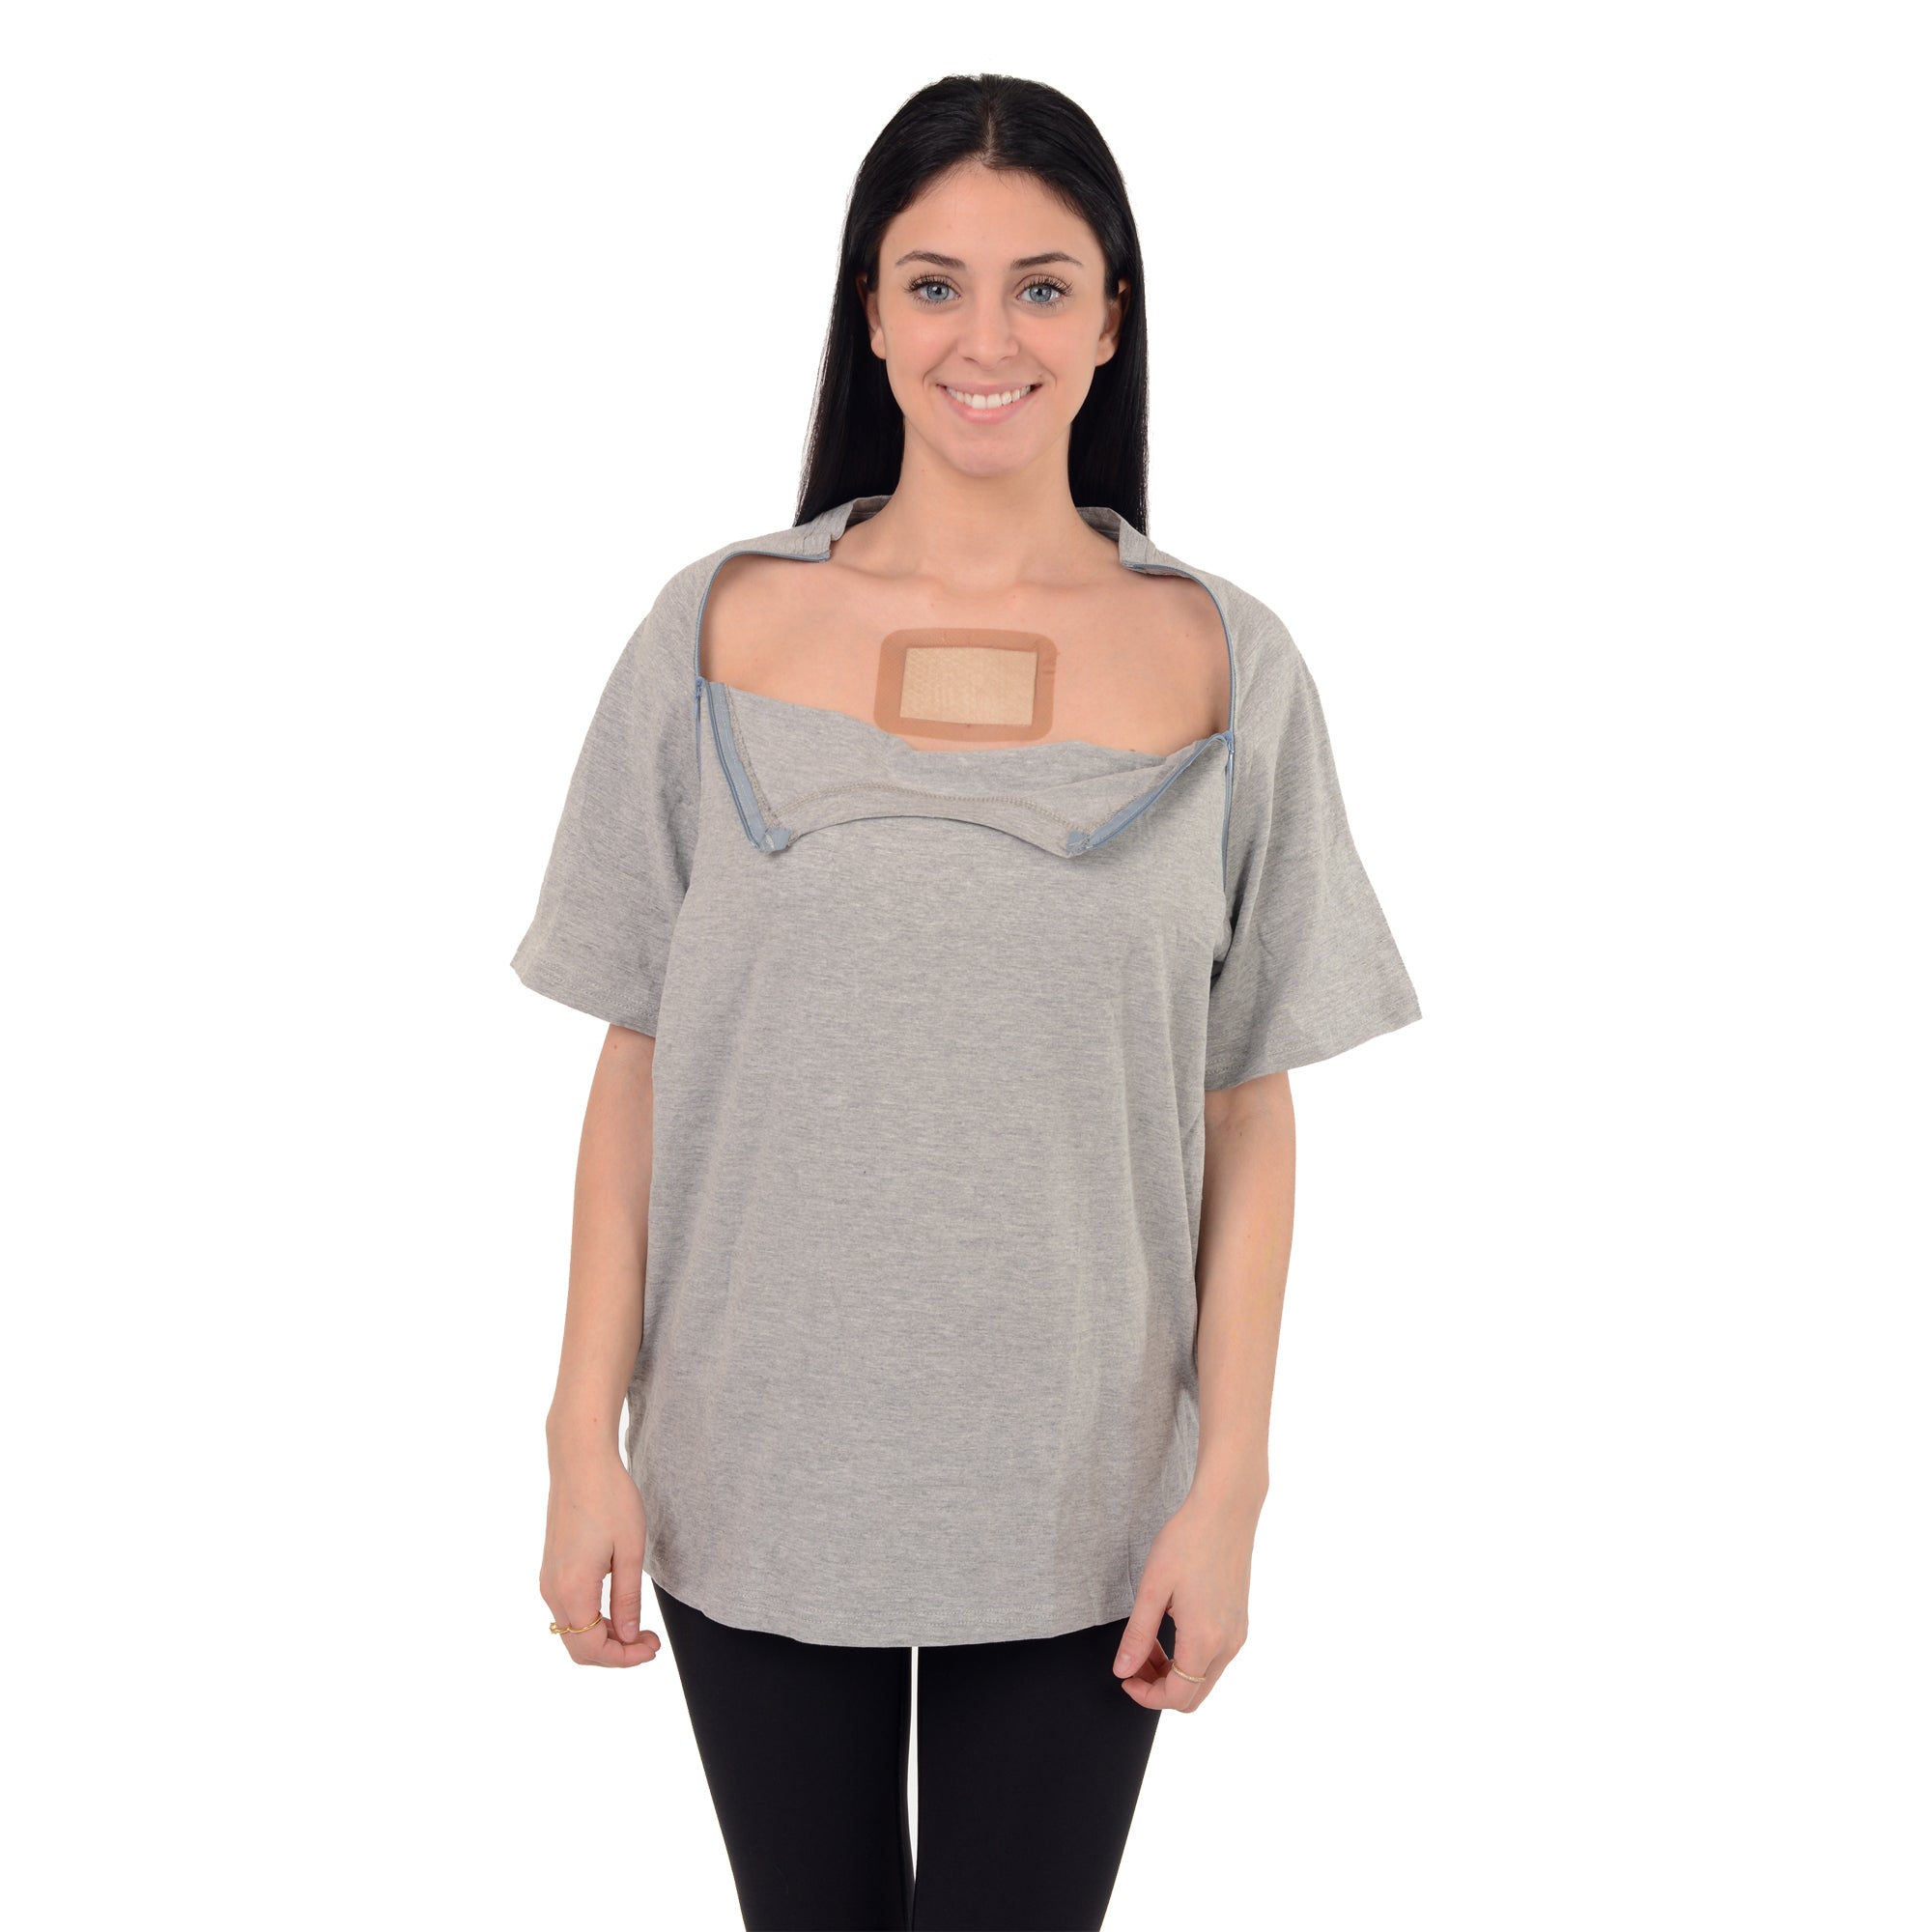 Post Mastectomy Recovery Shirt Camisole With Drain Pockets Management